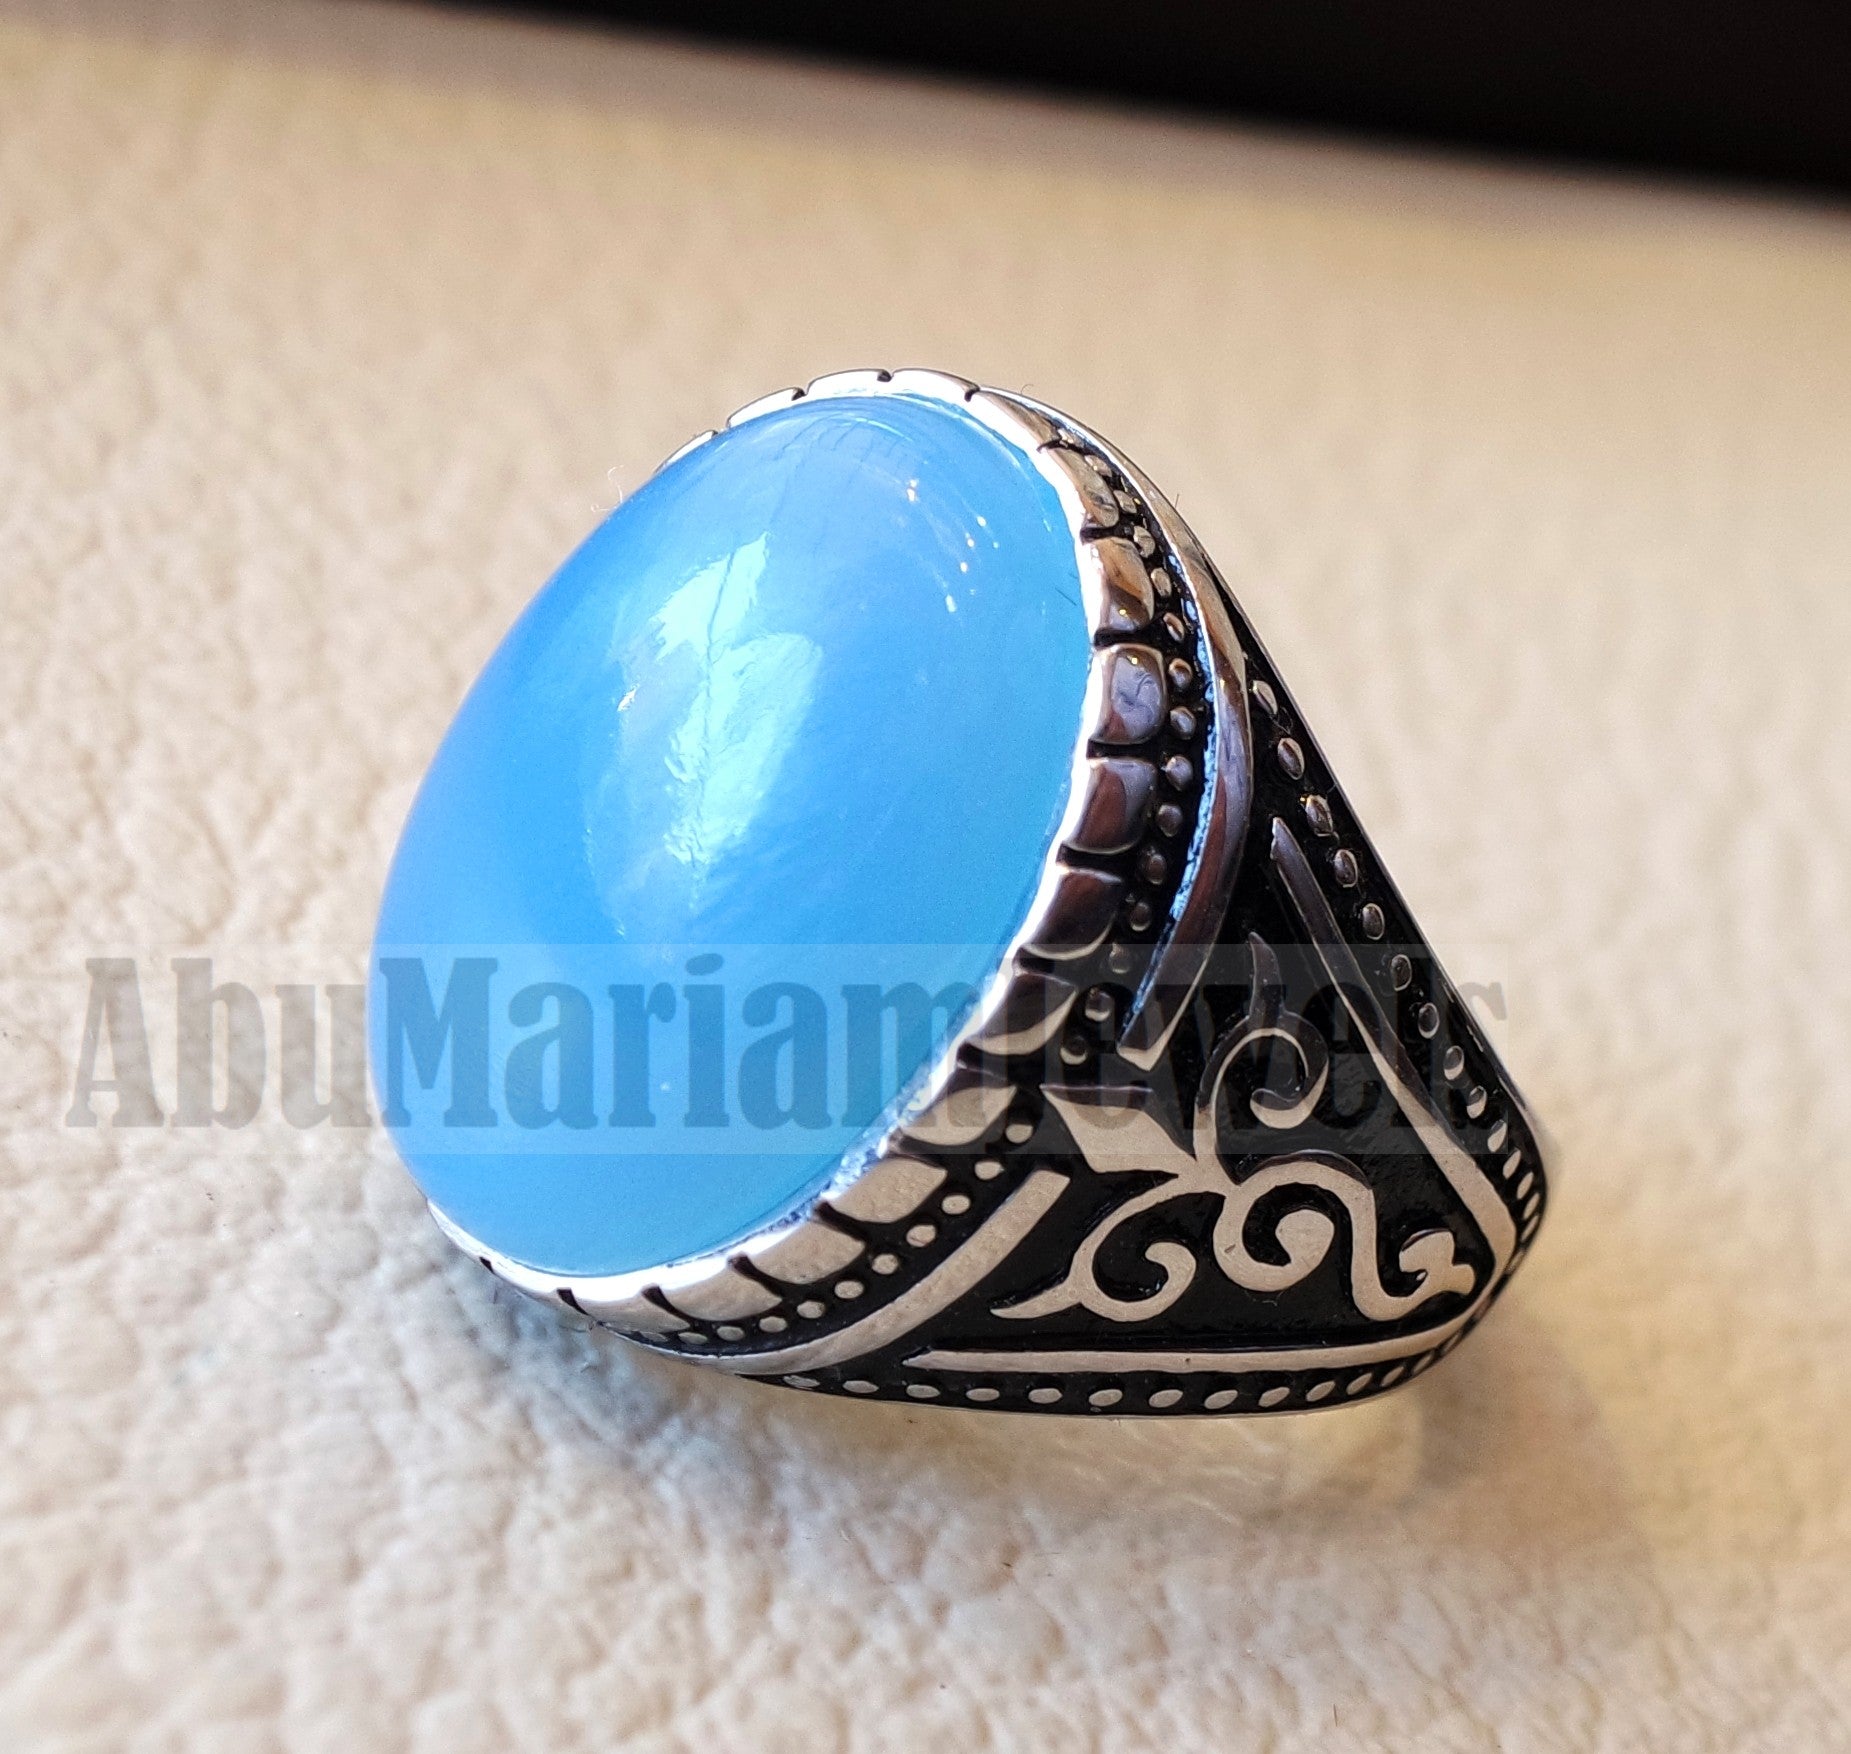 Blue Chalcedony men ring natural stone sterling silver 925 vintage turkish style all sizes jewelry fast shipping عقيق